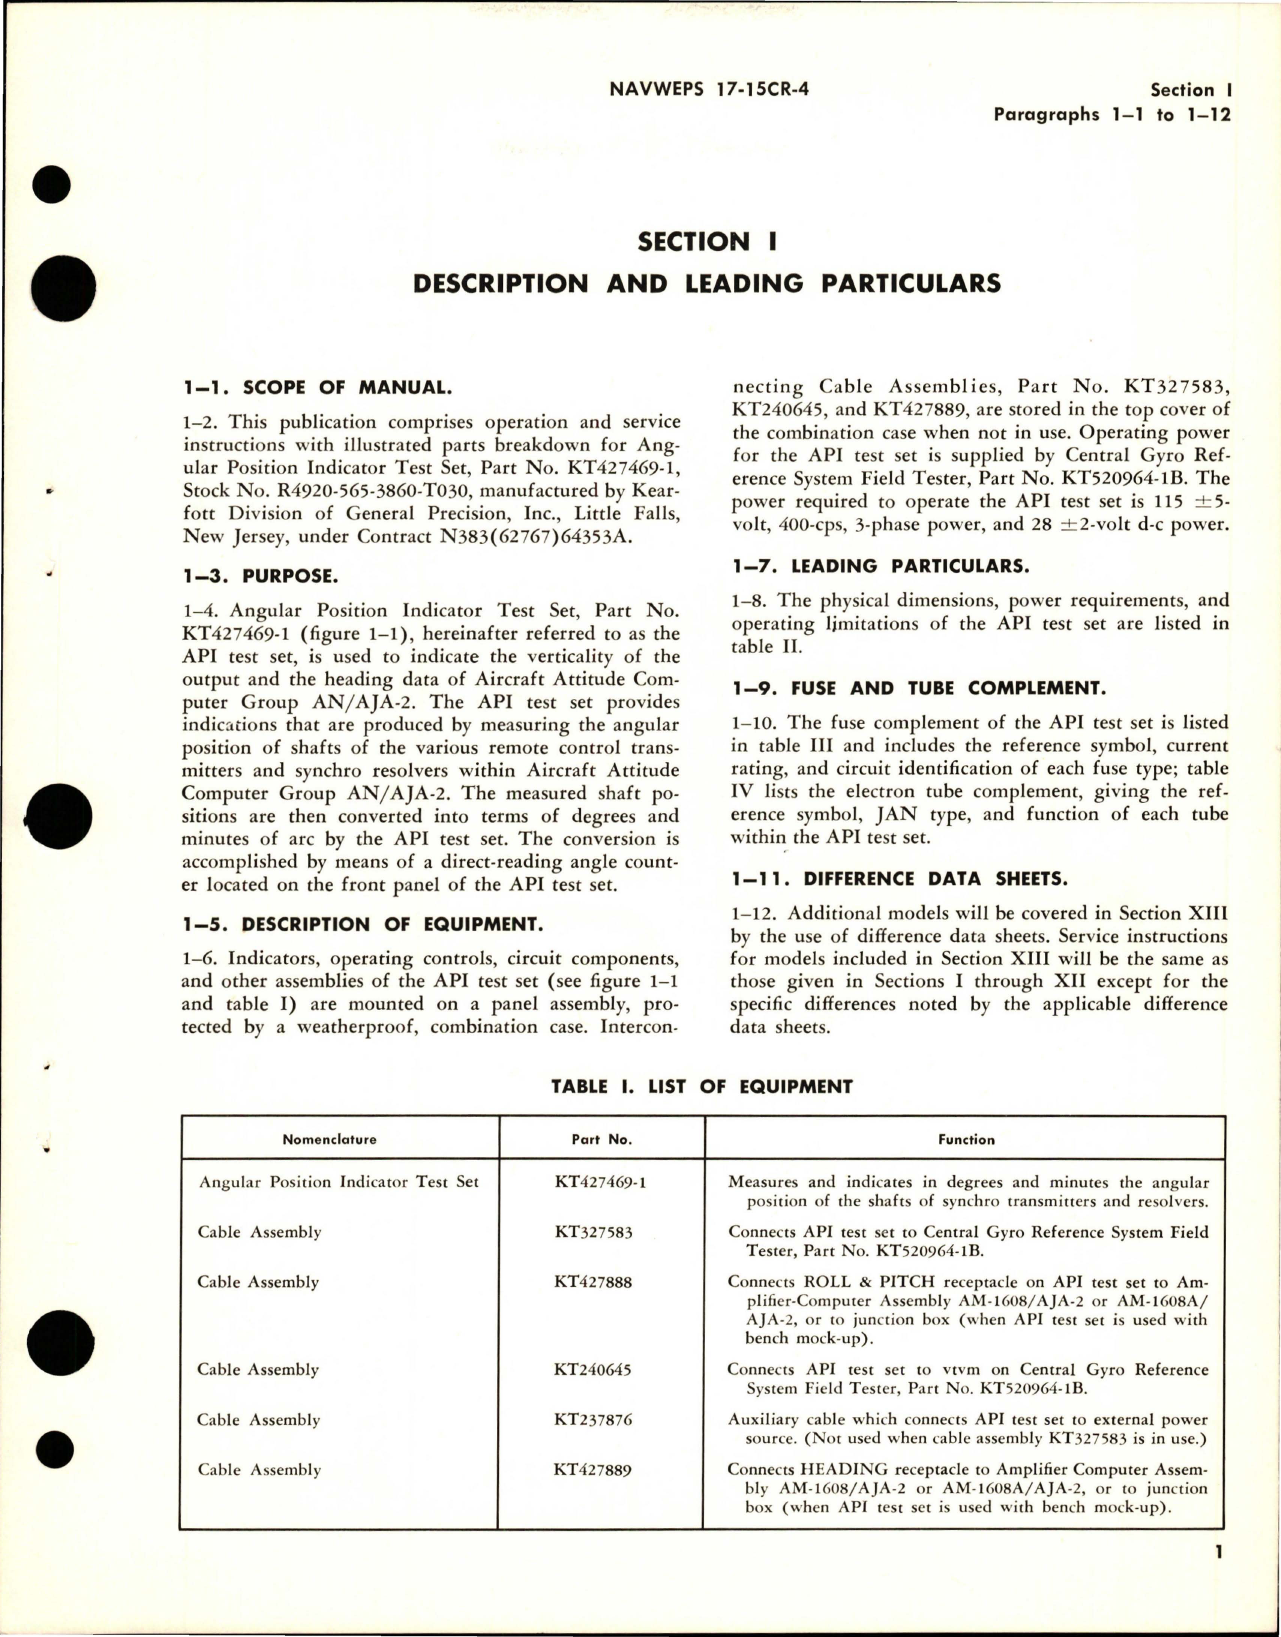 Sample page 7 from AirCorps Library document: Operation and Service Instructions with Illustrated Parts for Angular Position Indicator Test Set - Part KT427469-1